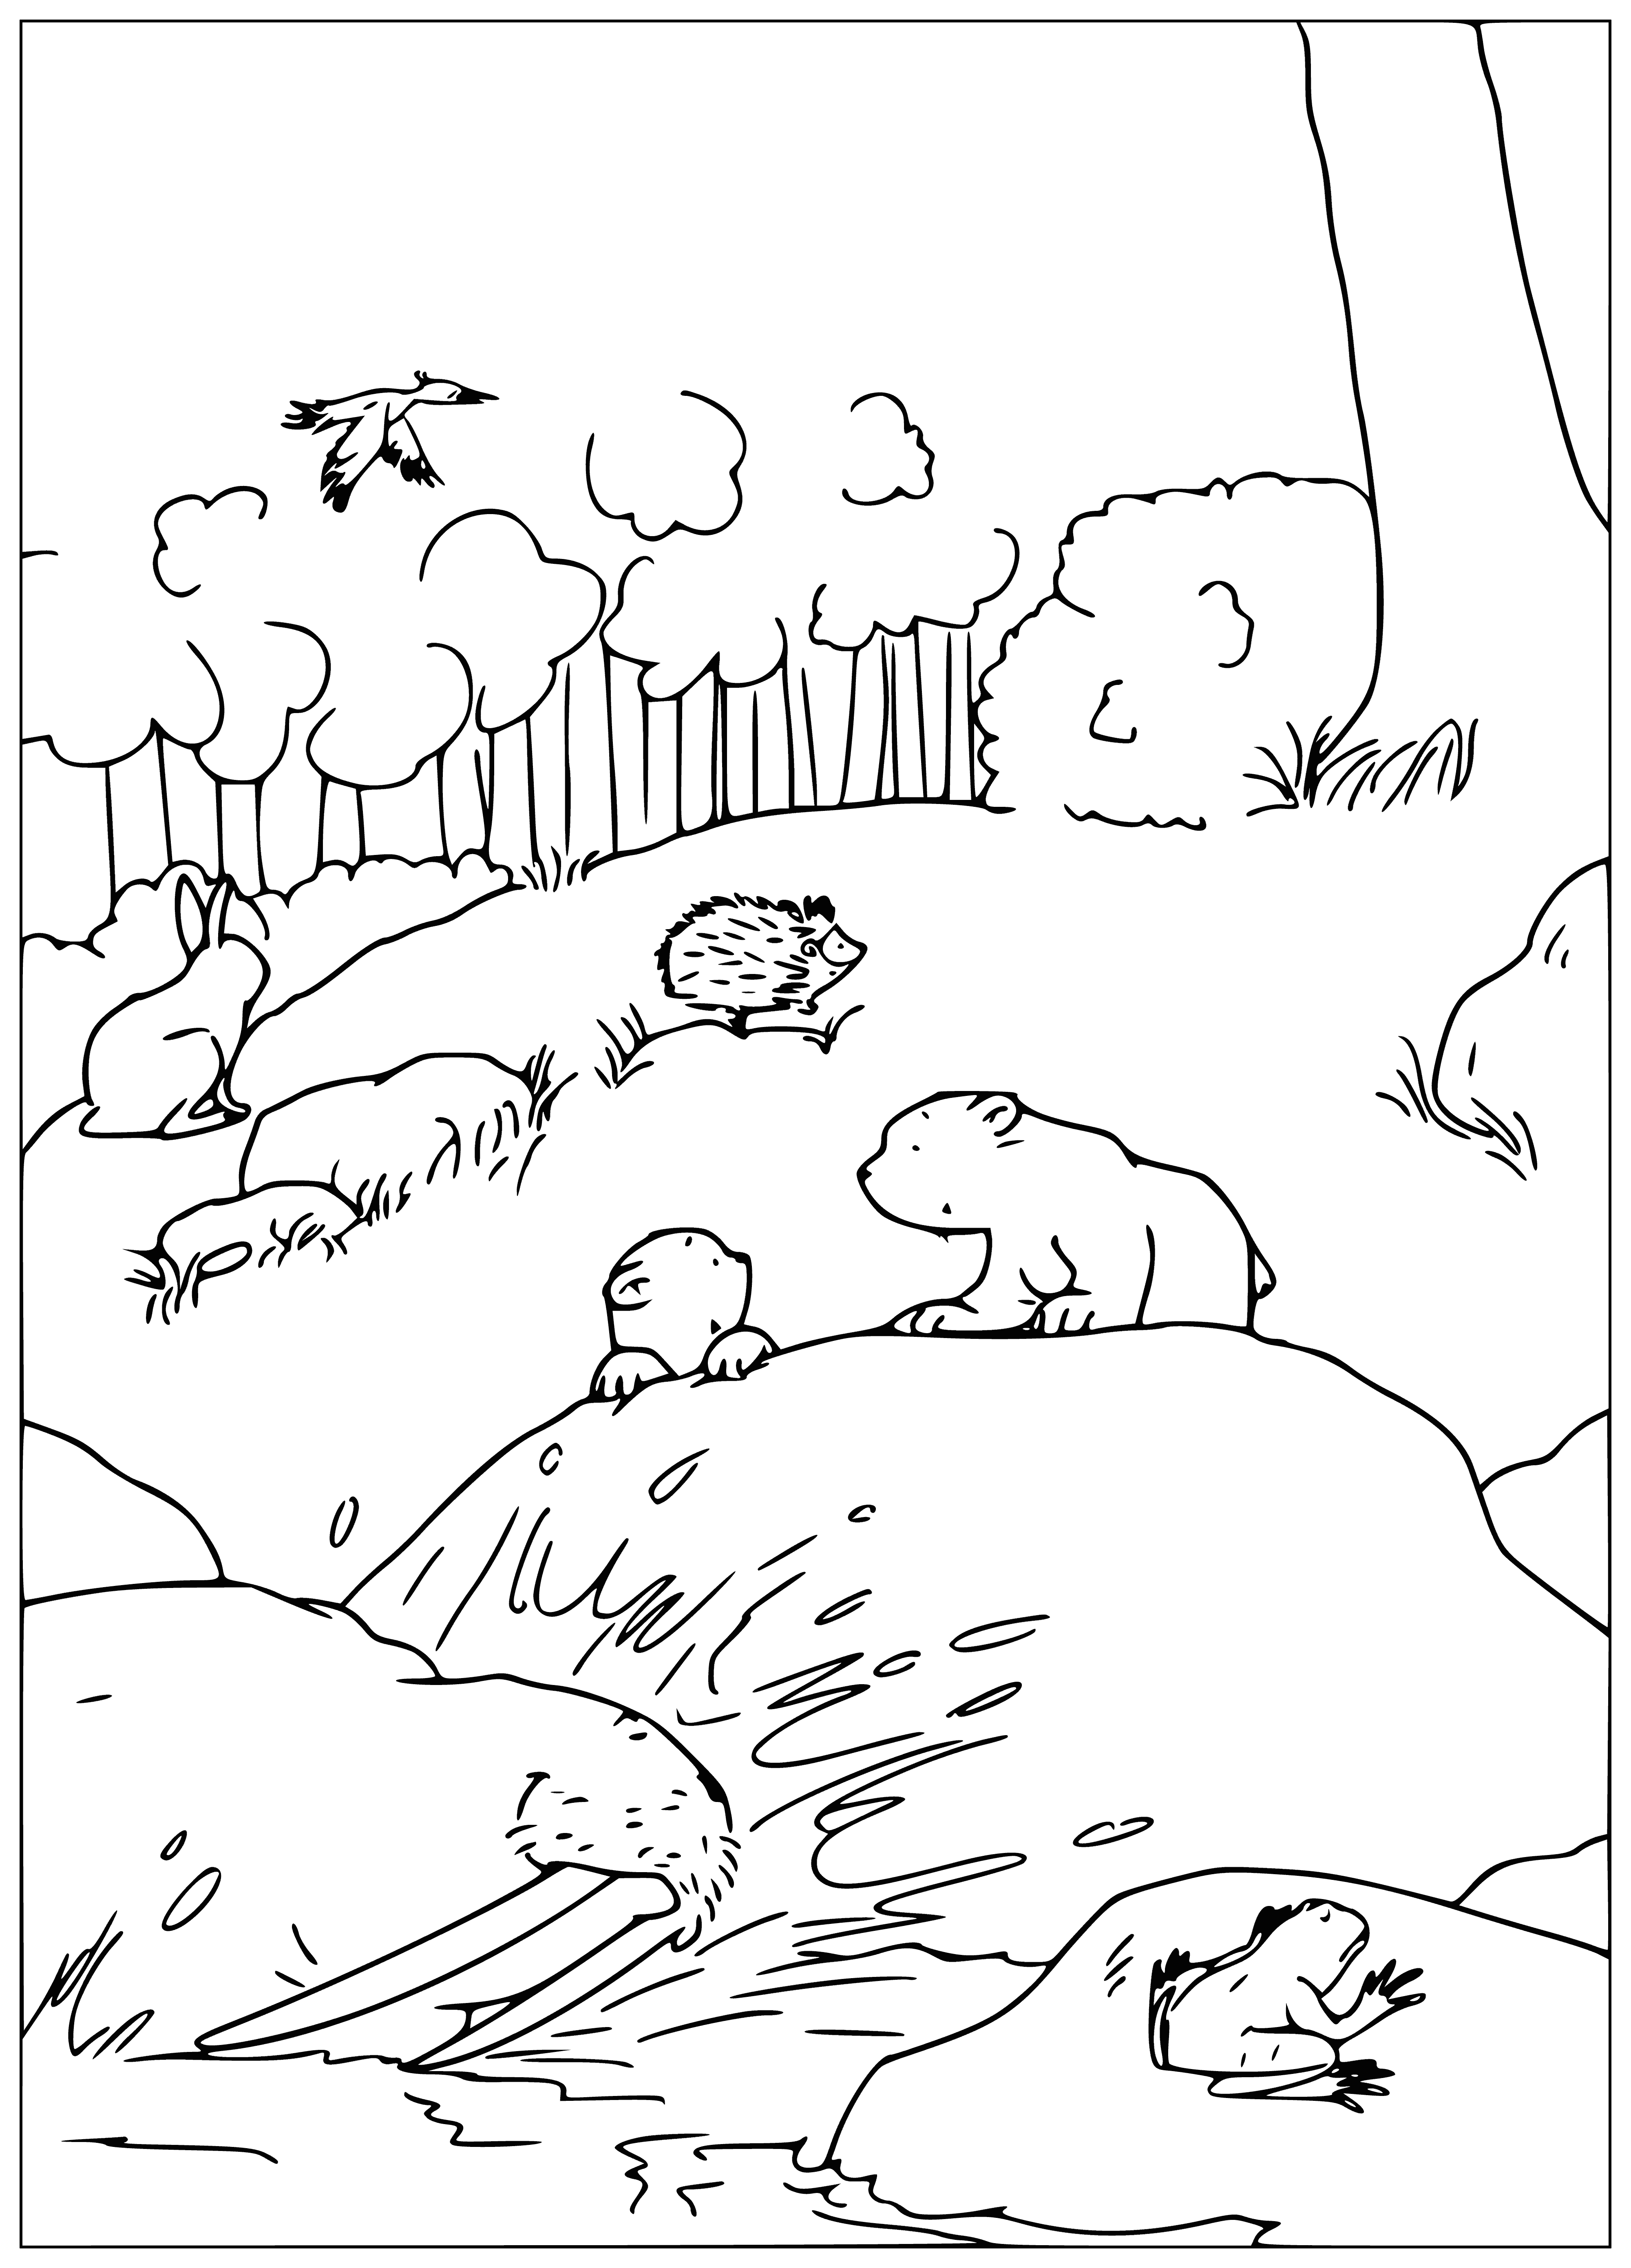 coloring page: Little polar bear sits on edge of ice, watching 2 birds on shore. One standing on one leg, pointing out to the water; the other with wings outstretched.